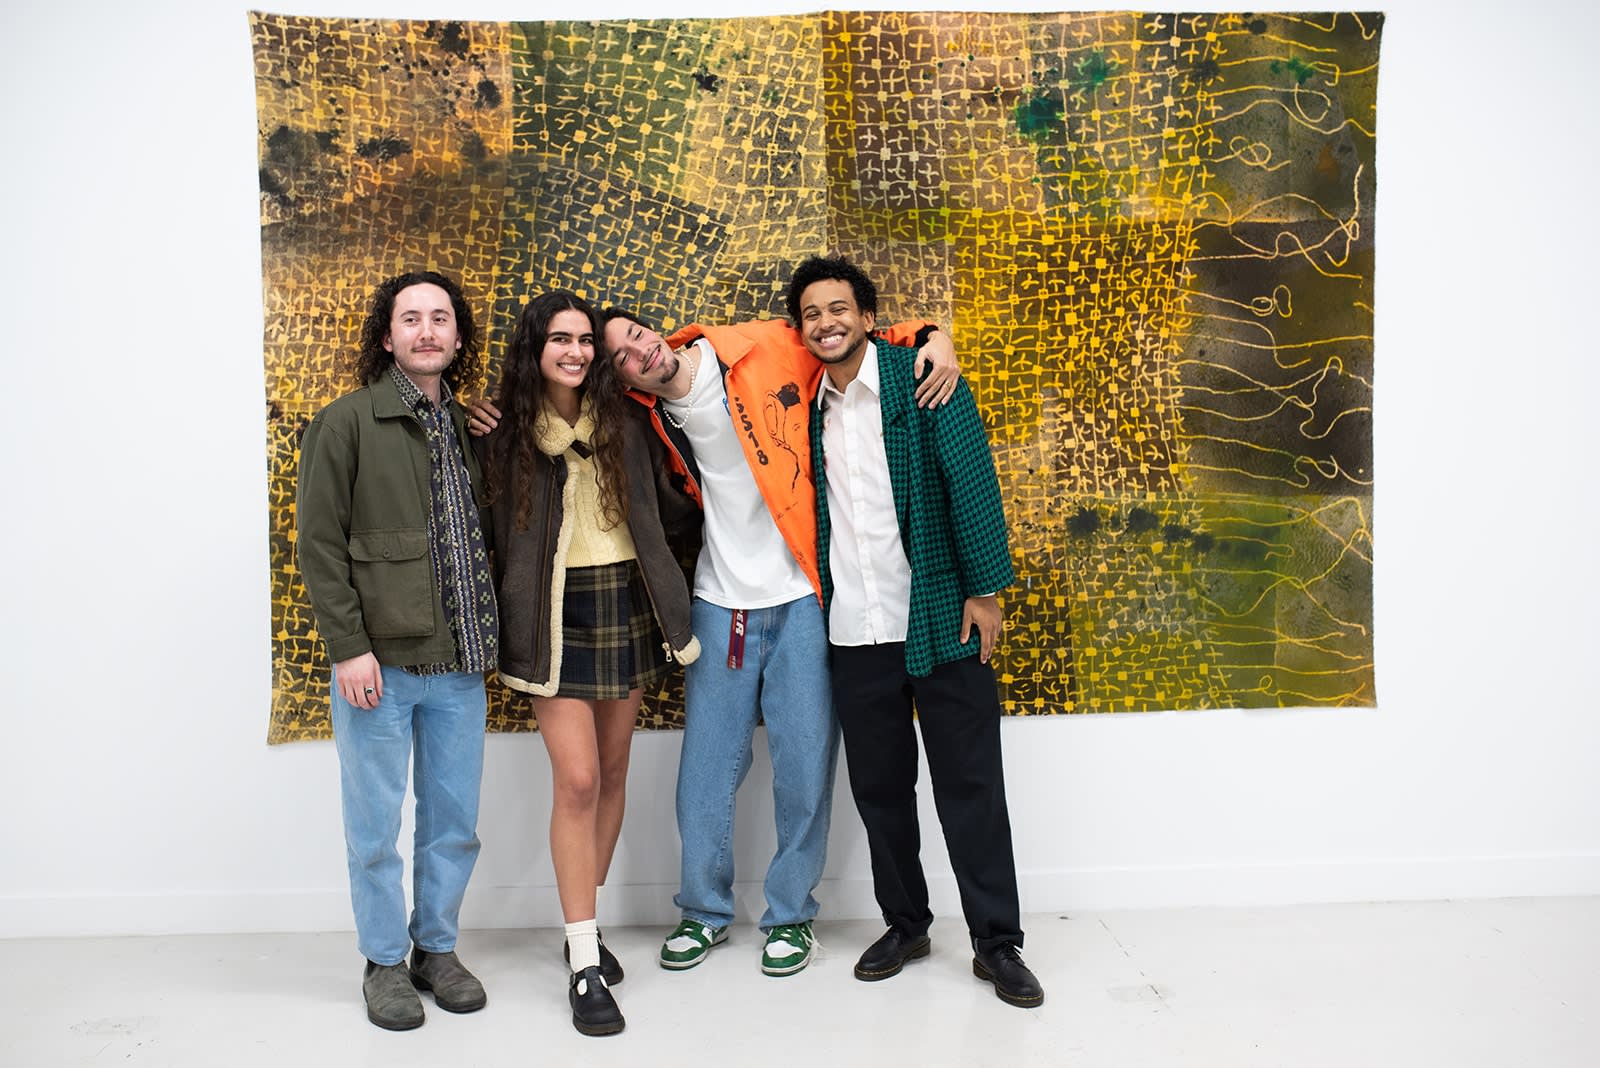 photo of the artists posing together in front of a large artwork